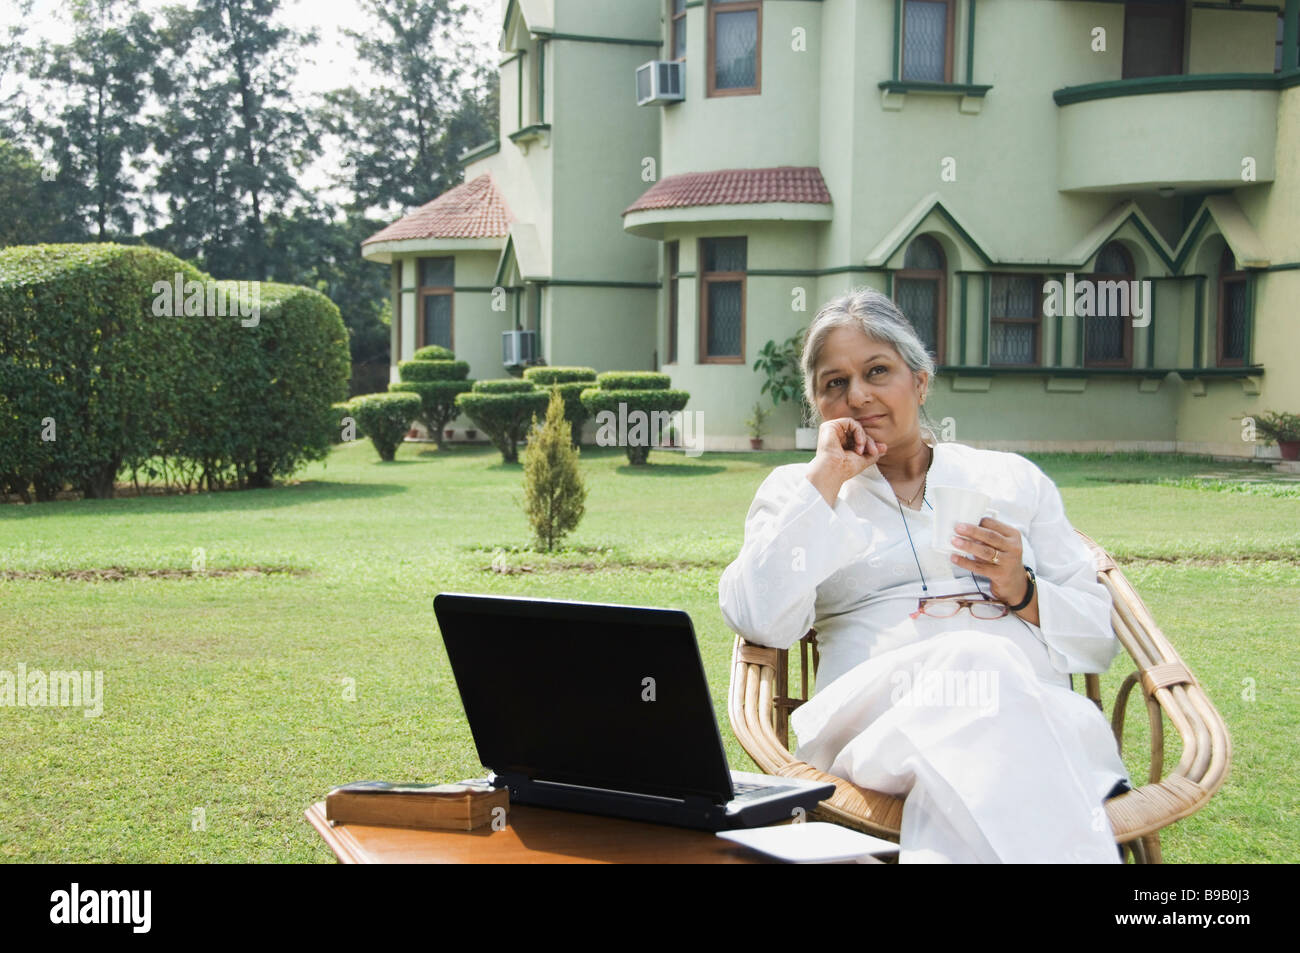 Woman with a laptop in a lawn, New Delhi, India Stock Photo